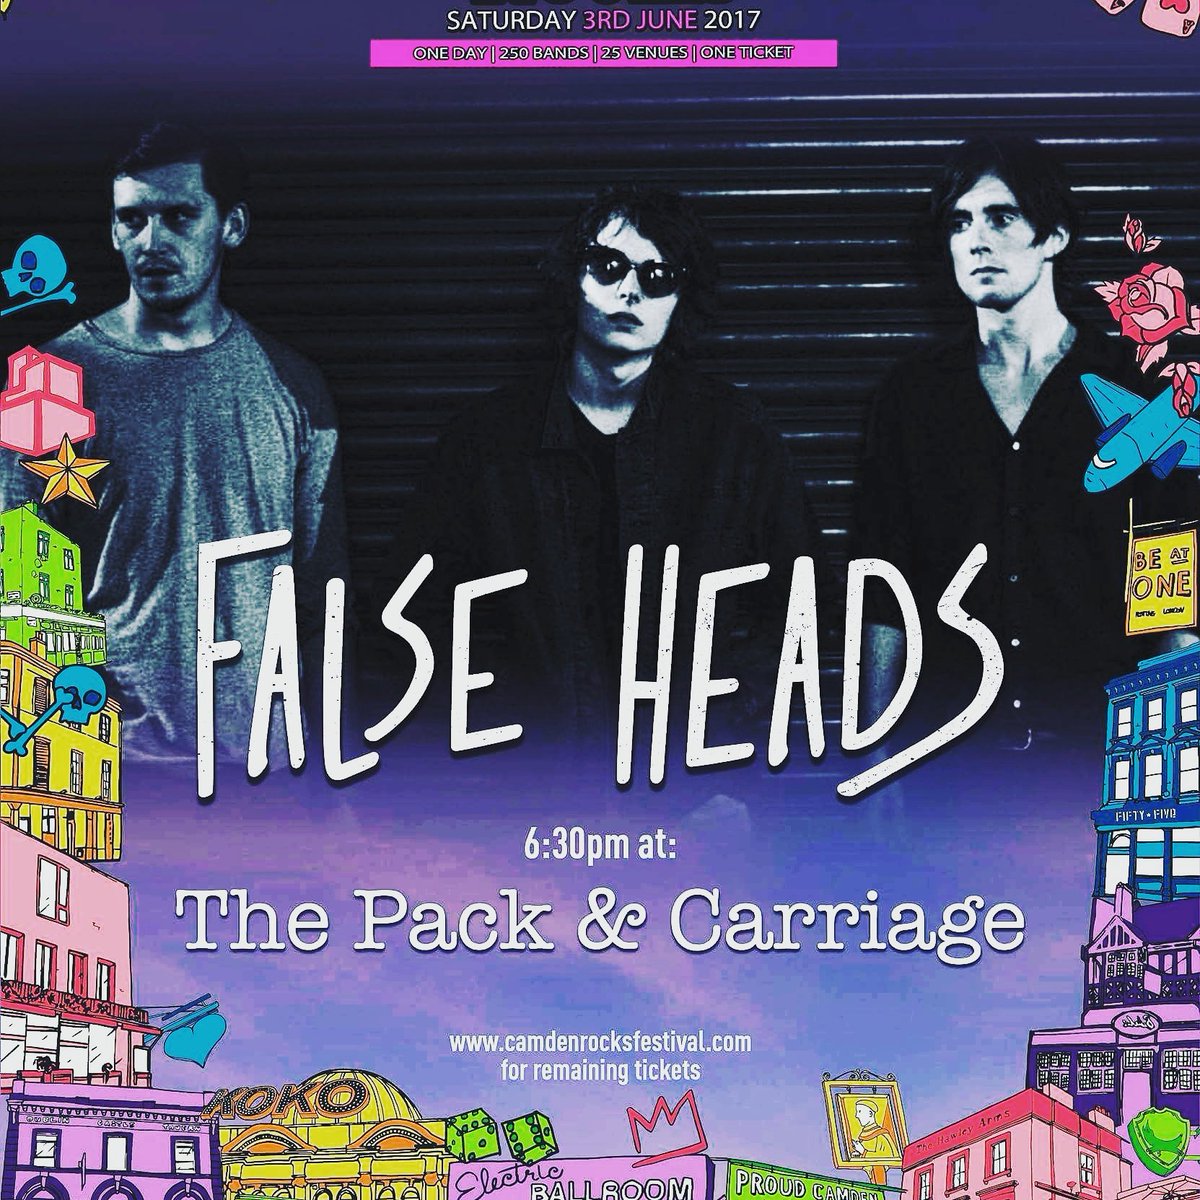 Tomorrow is going to be huge. Such a banging day out to get false headed. Good old Camden Rocks Festival